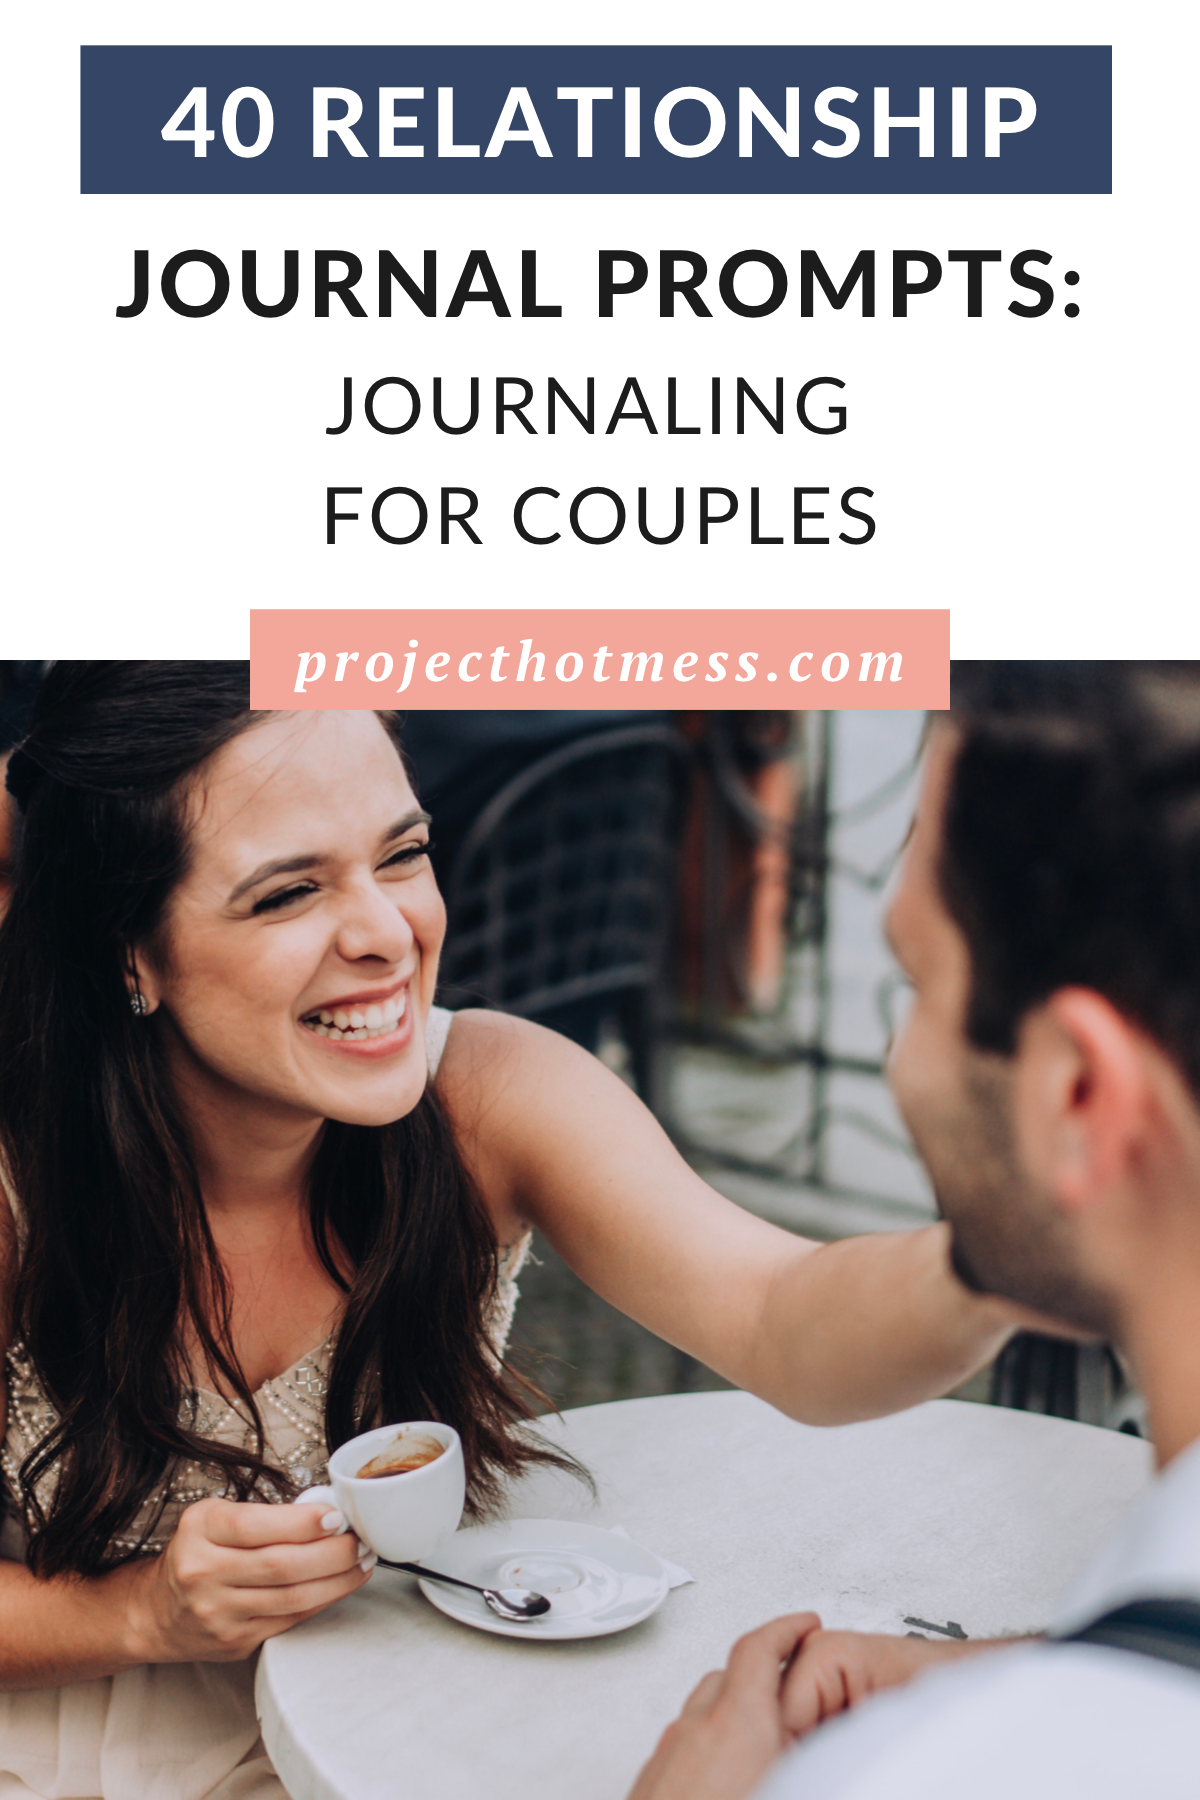 While journaling may be something that's often used for personal growth, answering journal questions in something such as a couple’s journal or a shared journal, can be a powerful tool for creating deeper connections in a simple way, while also exploring different ways to communicate effectively. Here are 40 relationship journal prompts for couples.